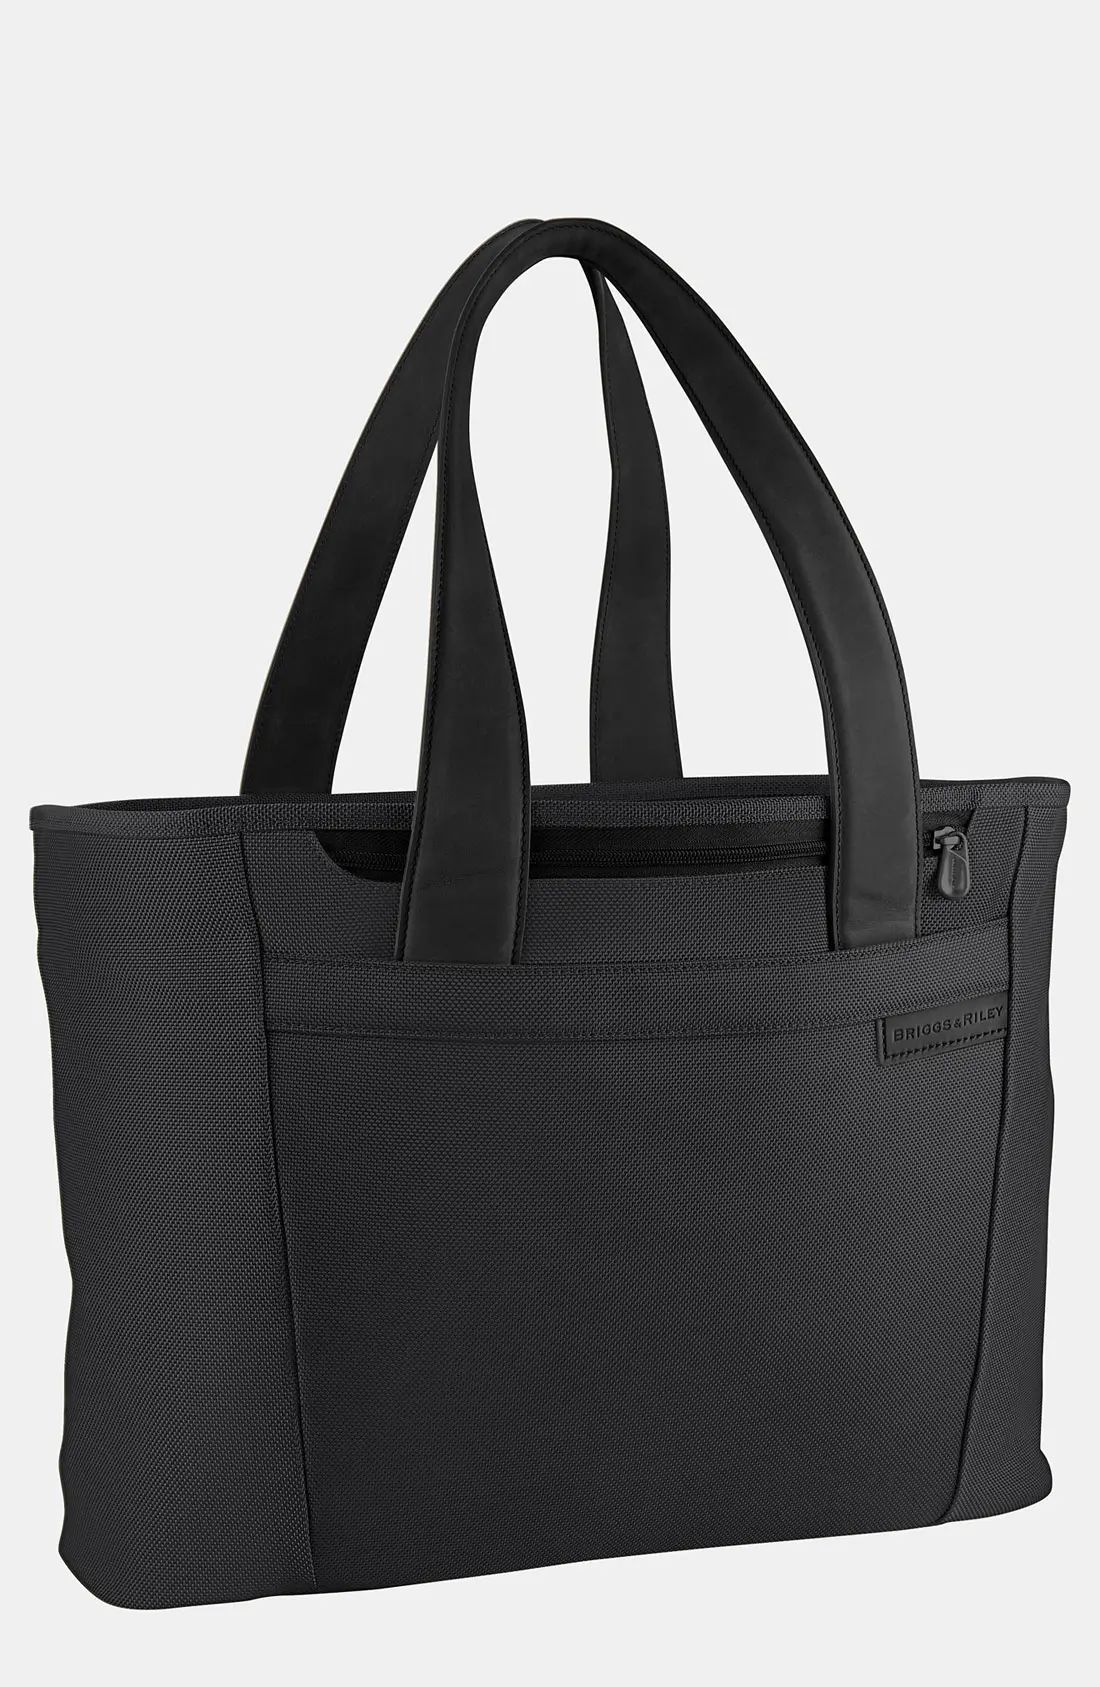 Briggs & Riley 'Large Baseline' Shopping Tote | Nordstrom